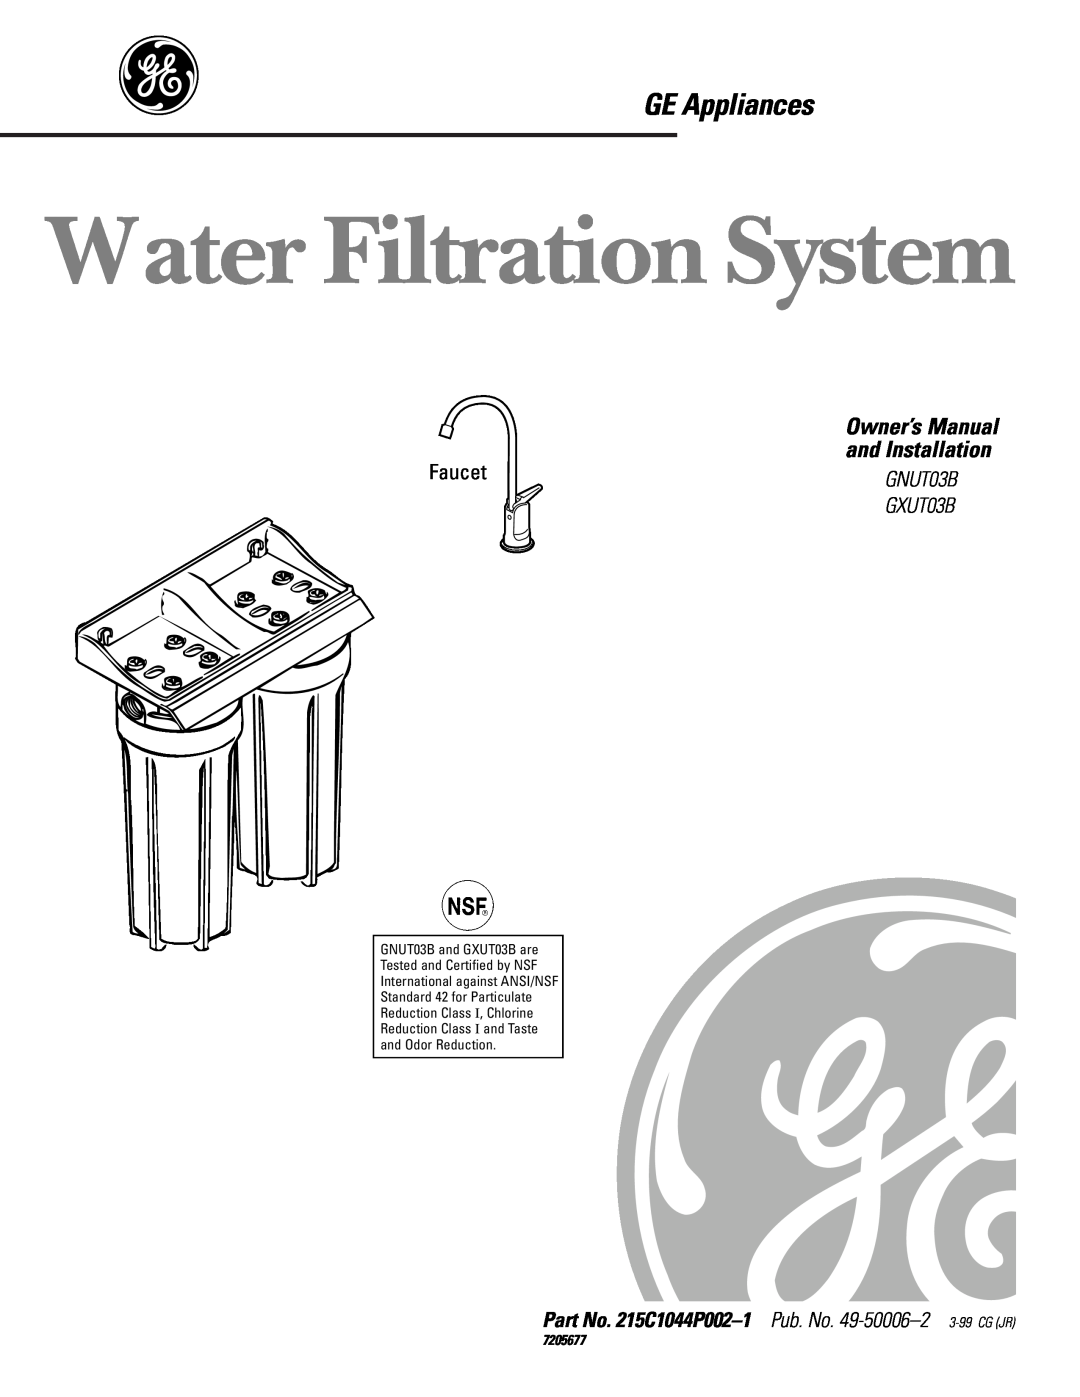 GE GXUT03B owner manual and Installation, Part No. 215C1044P002-1 Pub. No. 49-50006-2 3-99 CG JR, Water Filtration System 